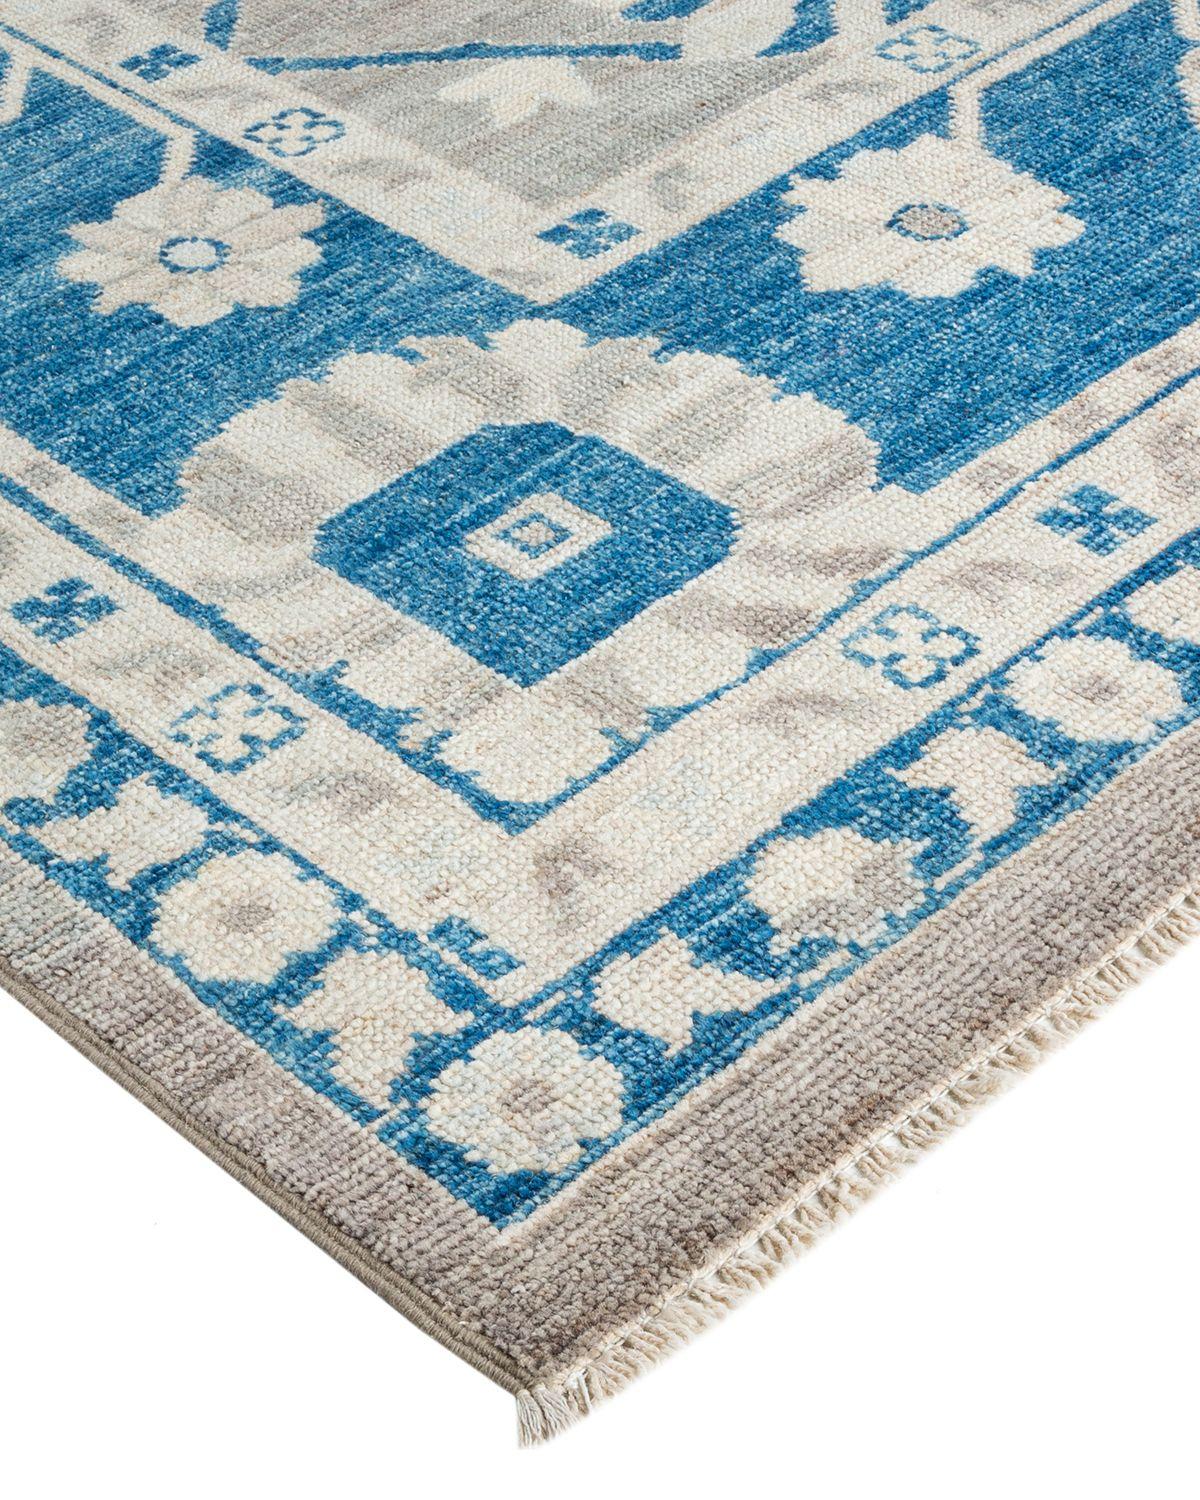 The rich textile tradition of western Africa inspired the Tribal collection of hand knotted rugs. Incorporating a medley of geometric motifs, in palettes ranging from earthy to vivacious, these rugs bring a sense of energy as well as plush texture